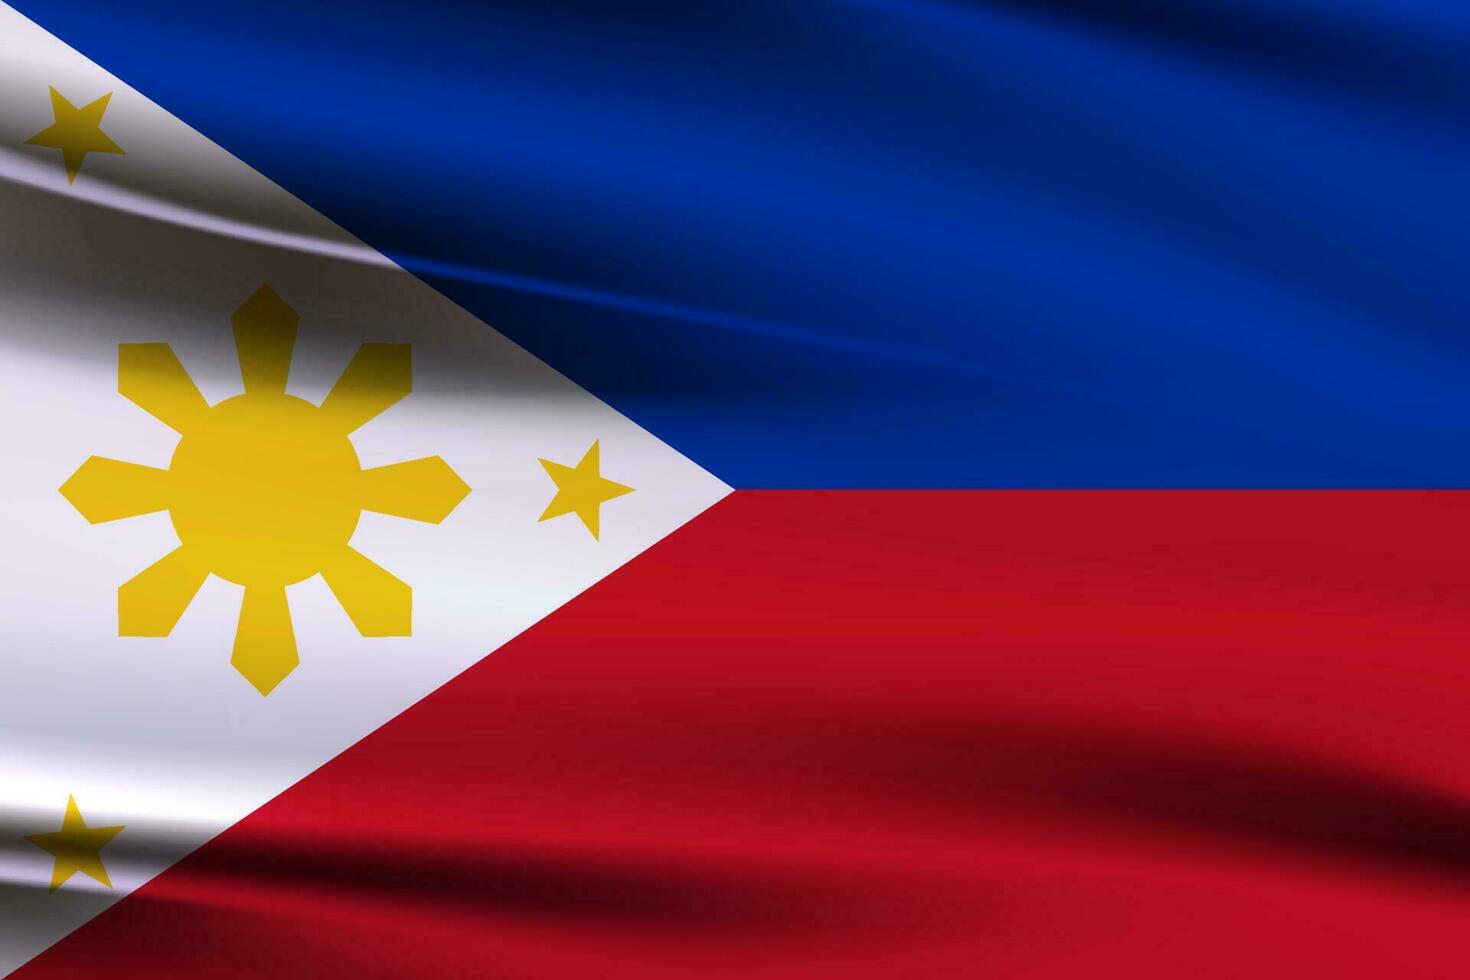 Philippines waving flag, Philippines National flag, 3d silk philippines flag, vector